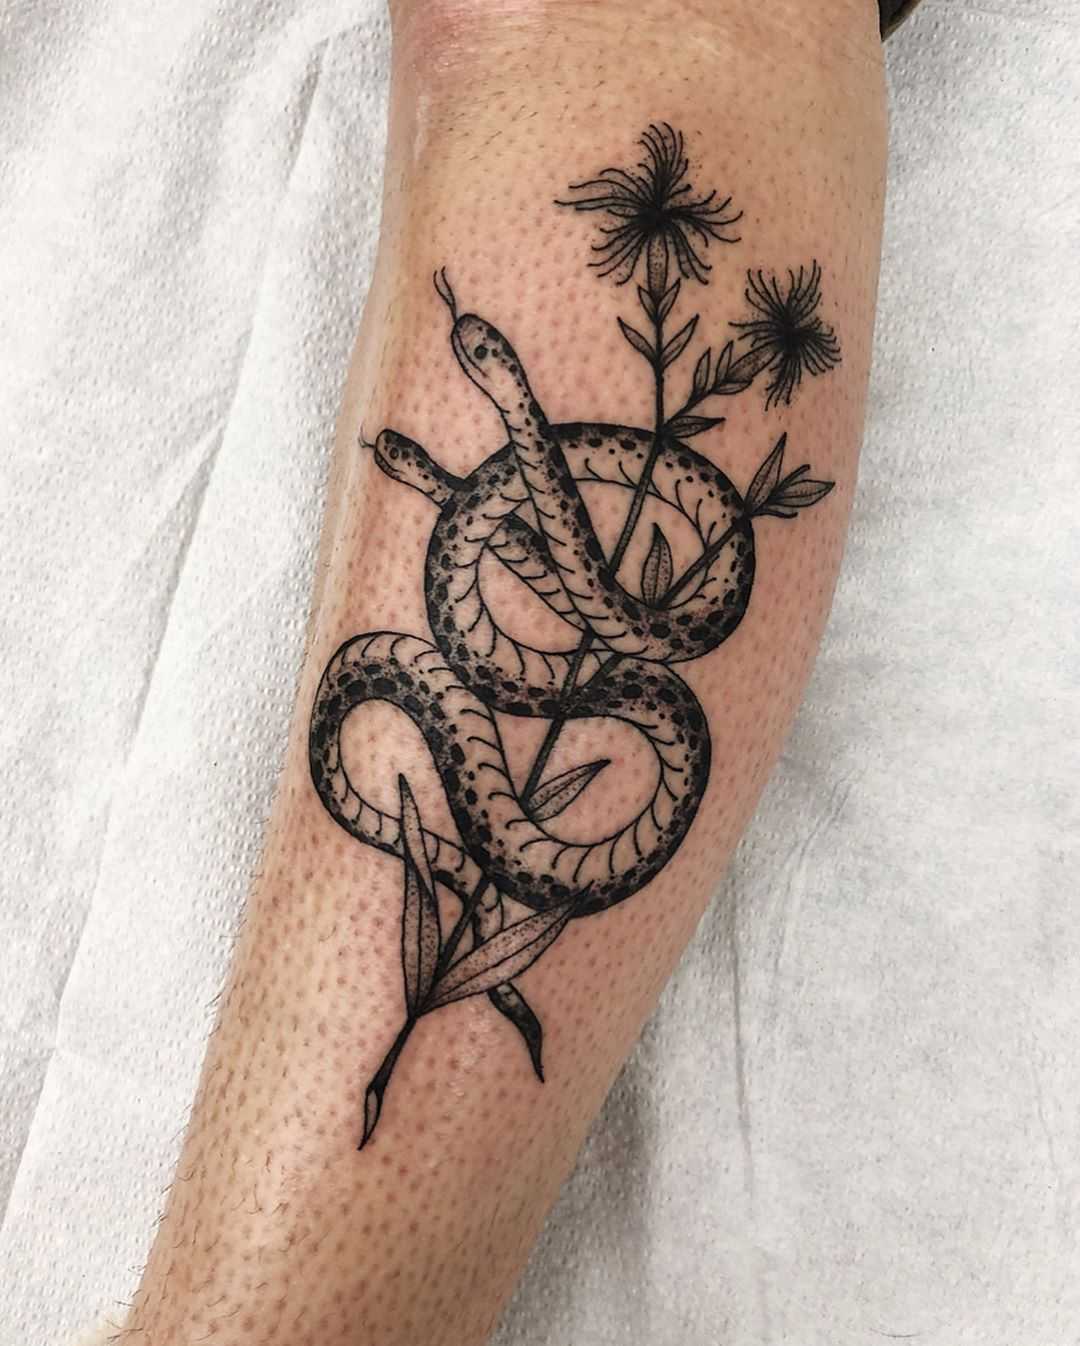 Two-headed snake and flower